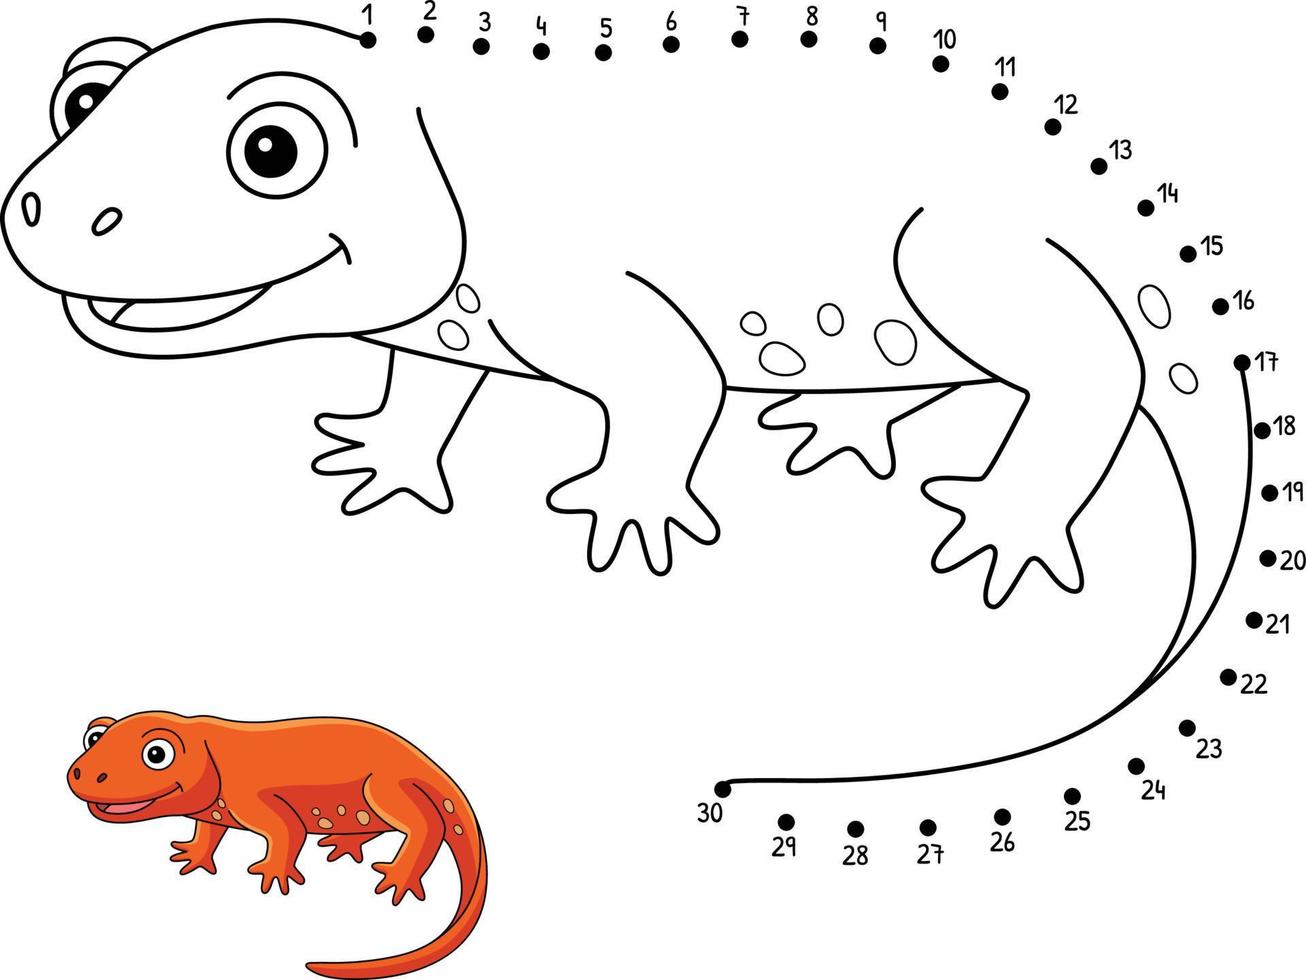 Dot to Dot Newt Animal Isolated Coloring Page vector